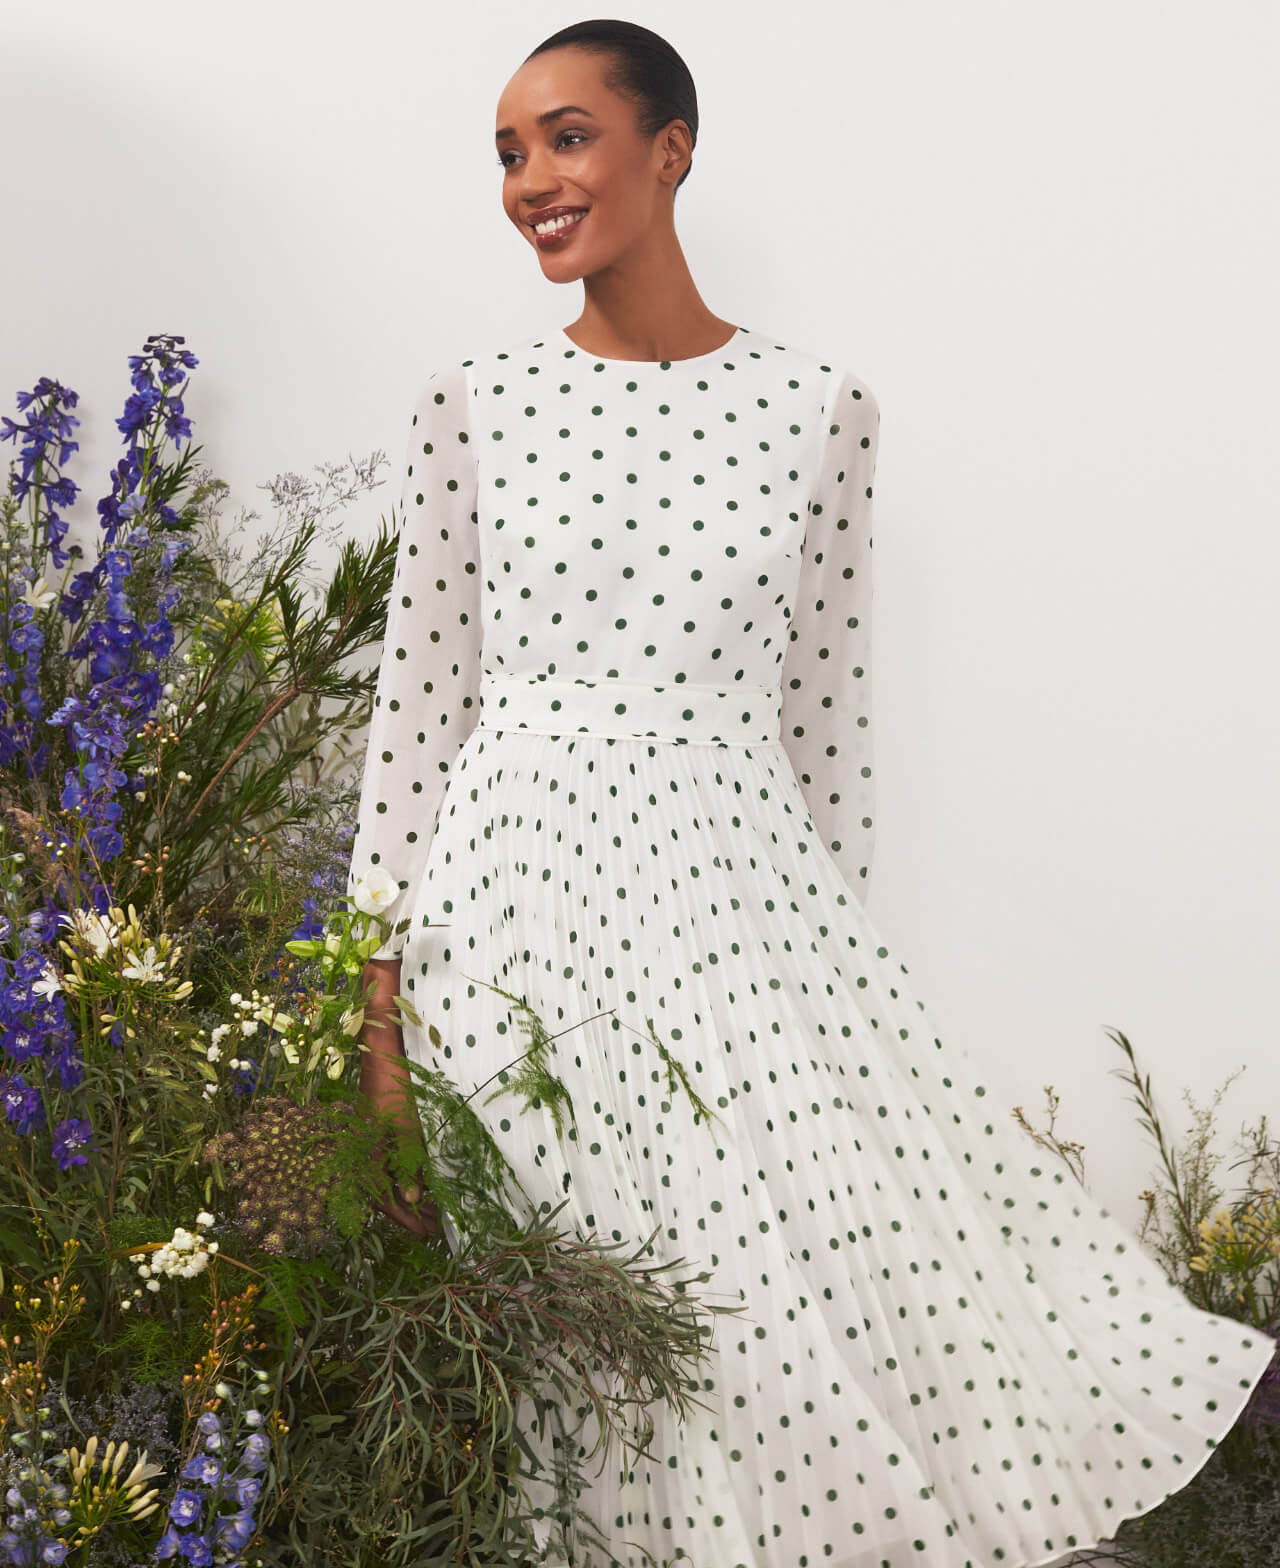 Hobbs stands next to a floral display wearing a polka dot fit and flare dress.